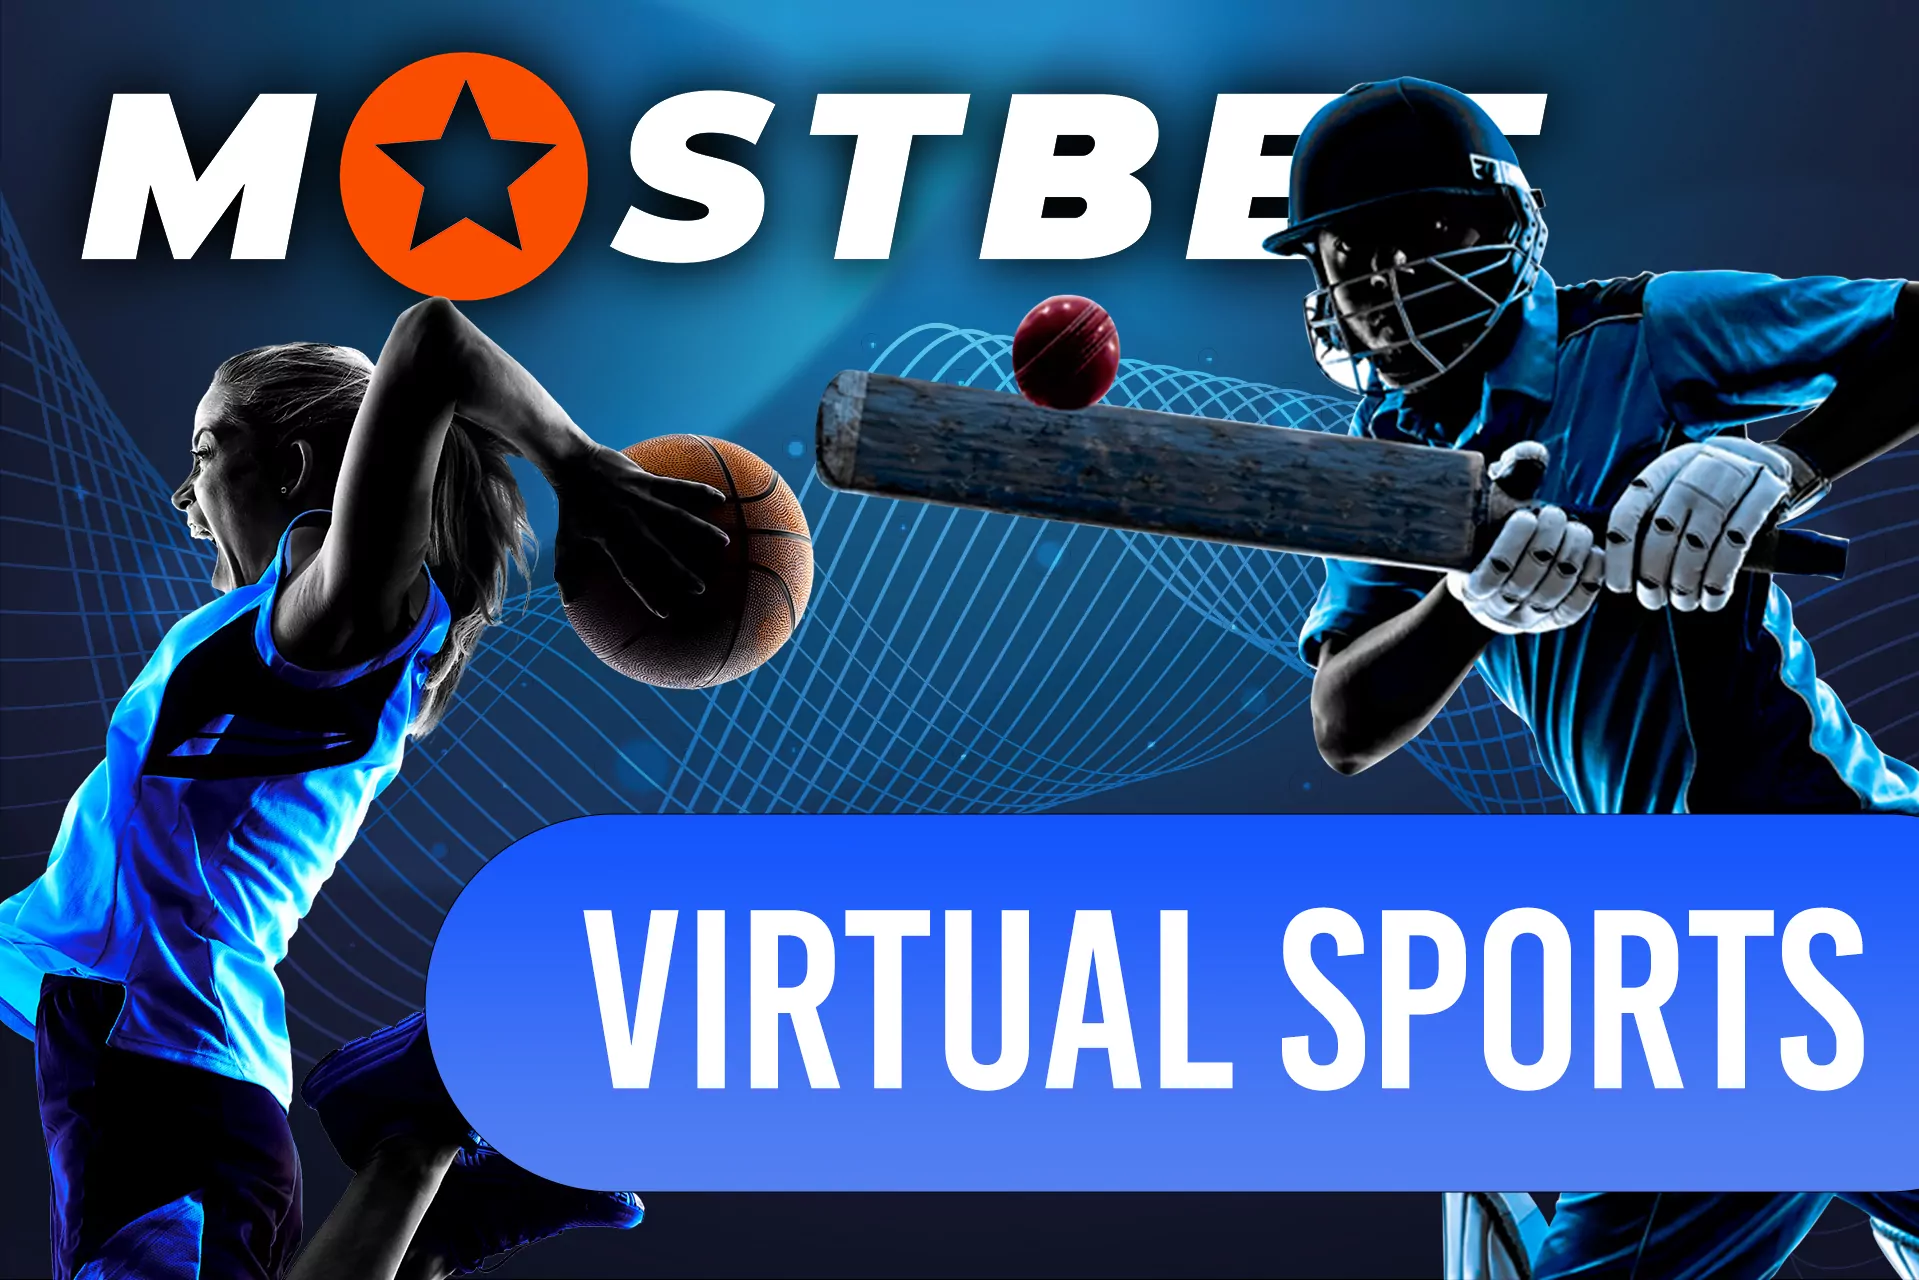 Virtual sports betting at Mostbet.